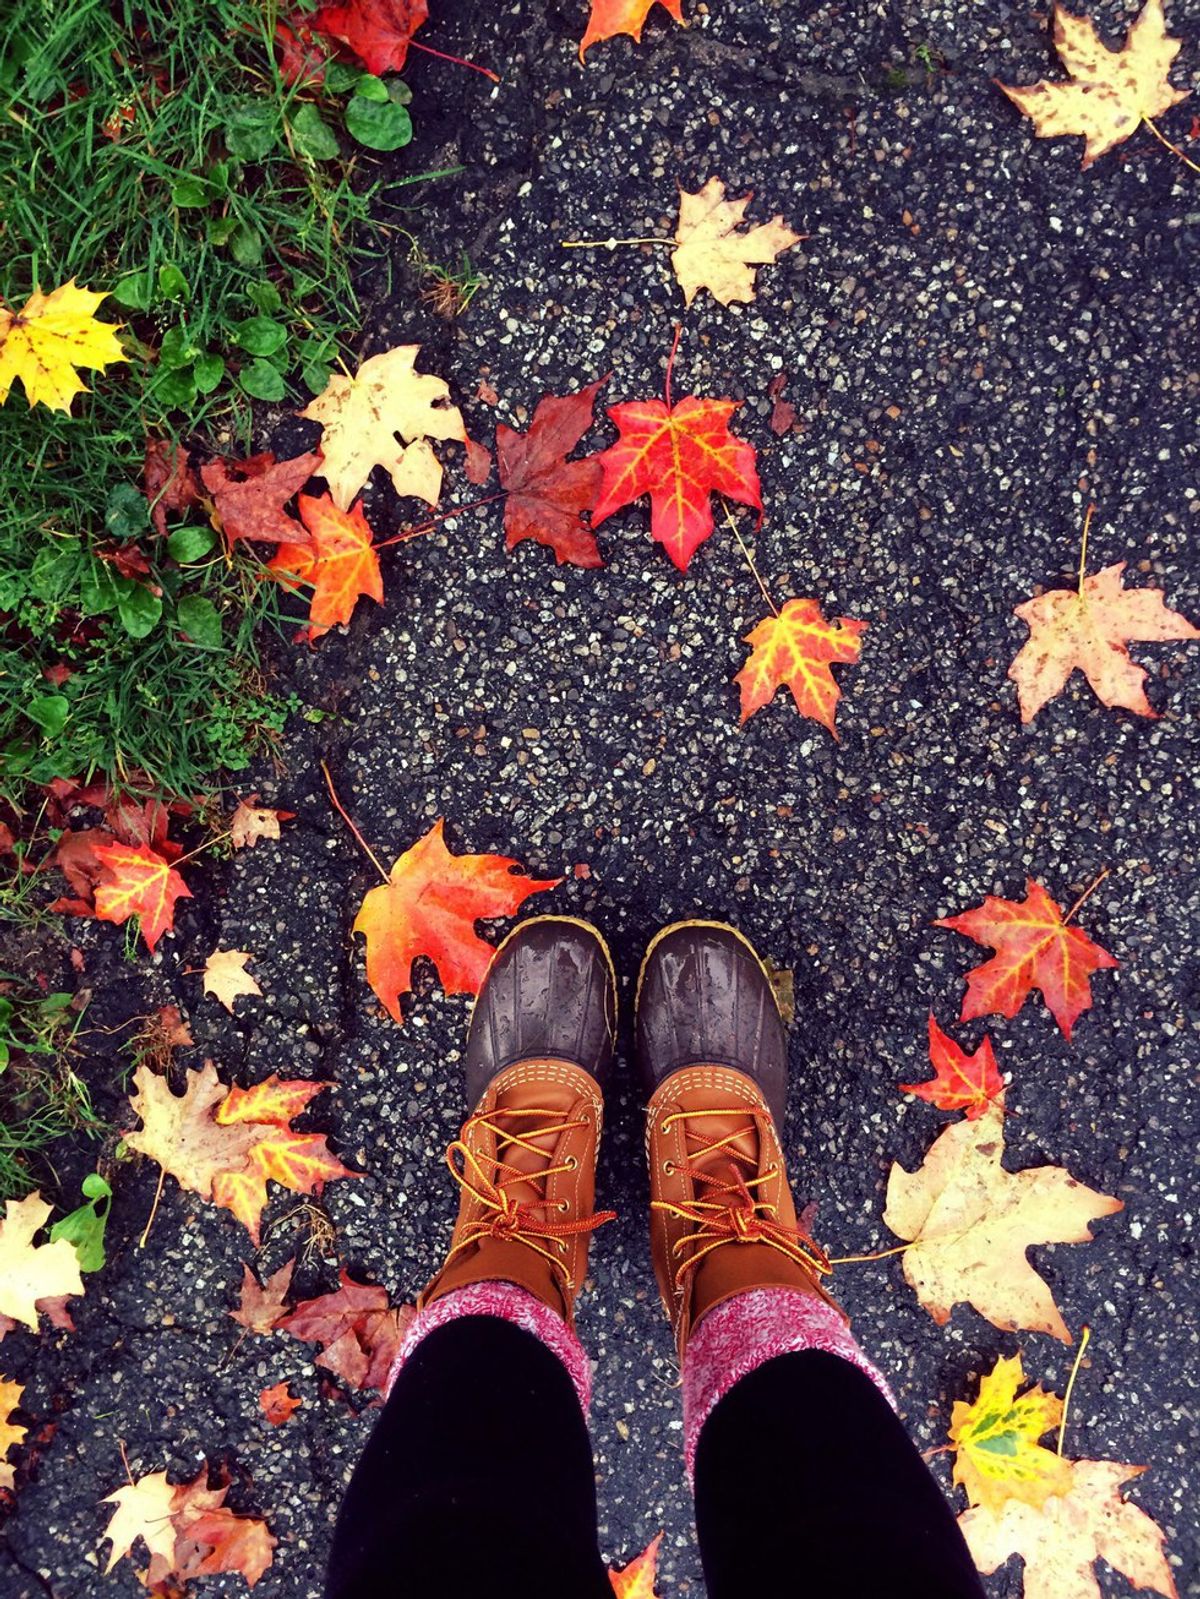 5 Reasons Why Autumn in New England Is the Best